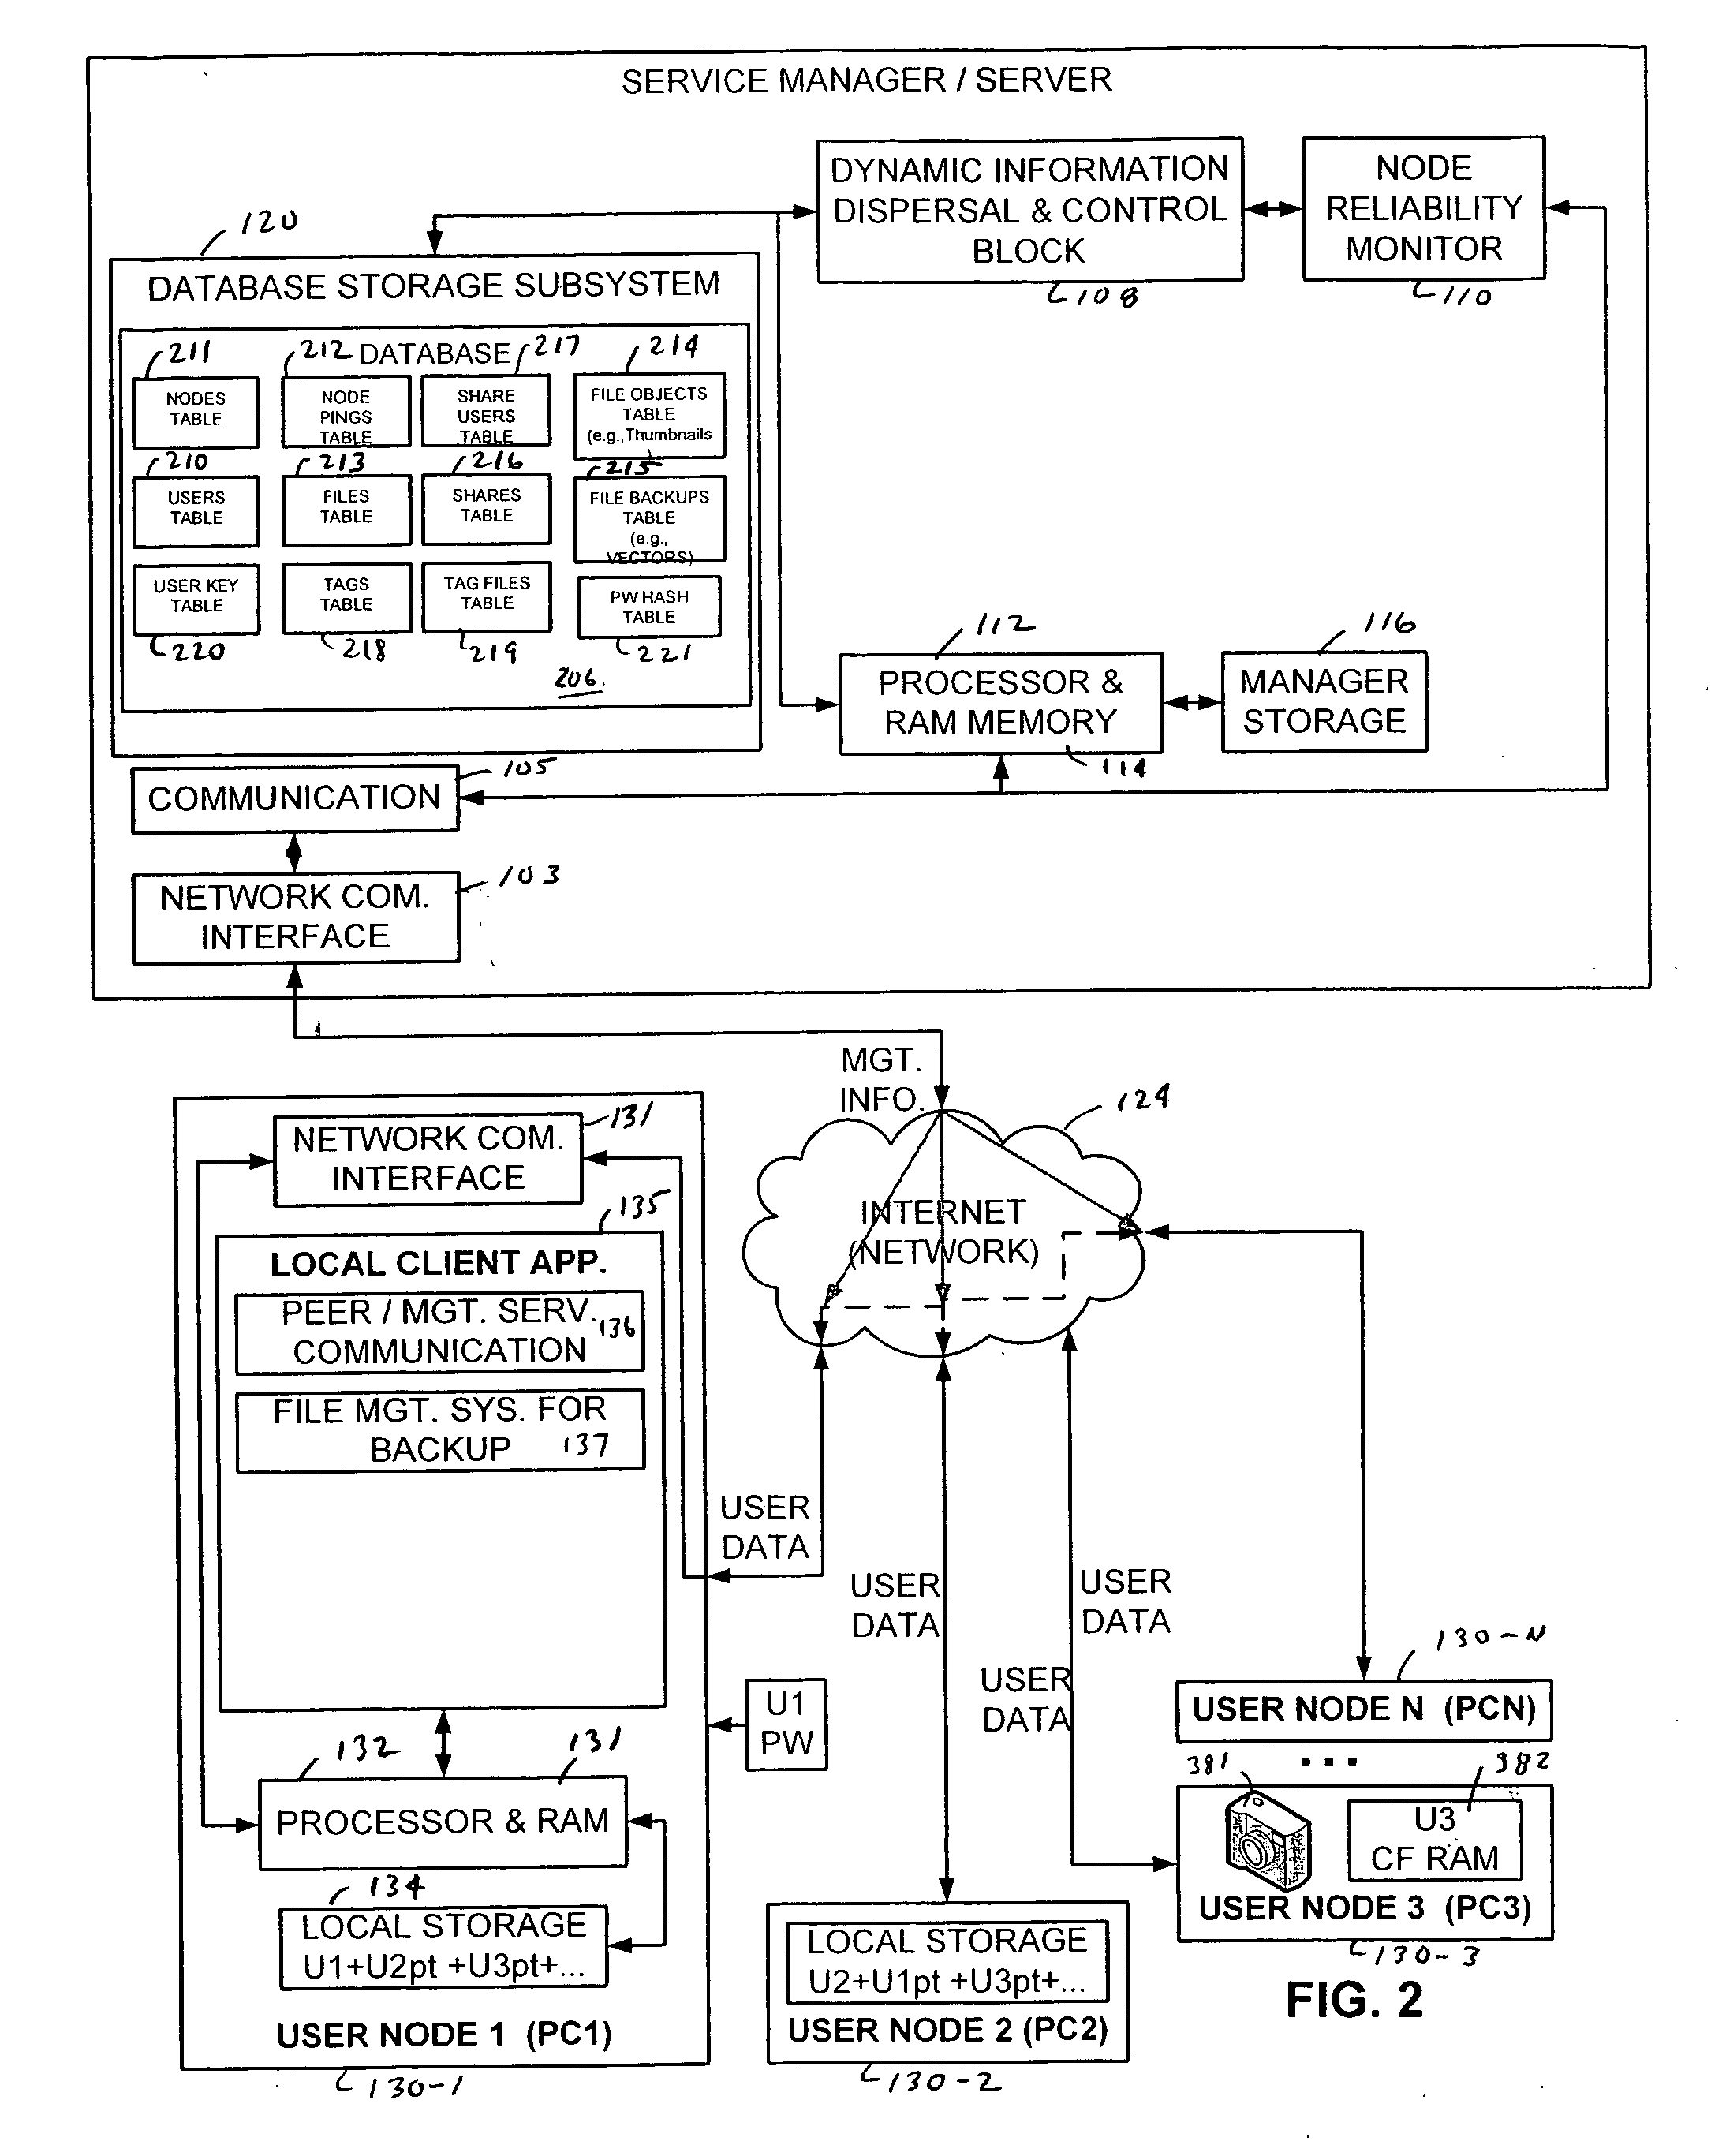 Managed peer-to-peer content backup service system and method using dynamic content dispersal to plural storage nodes